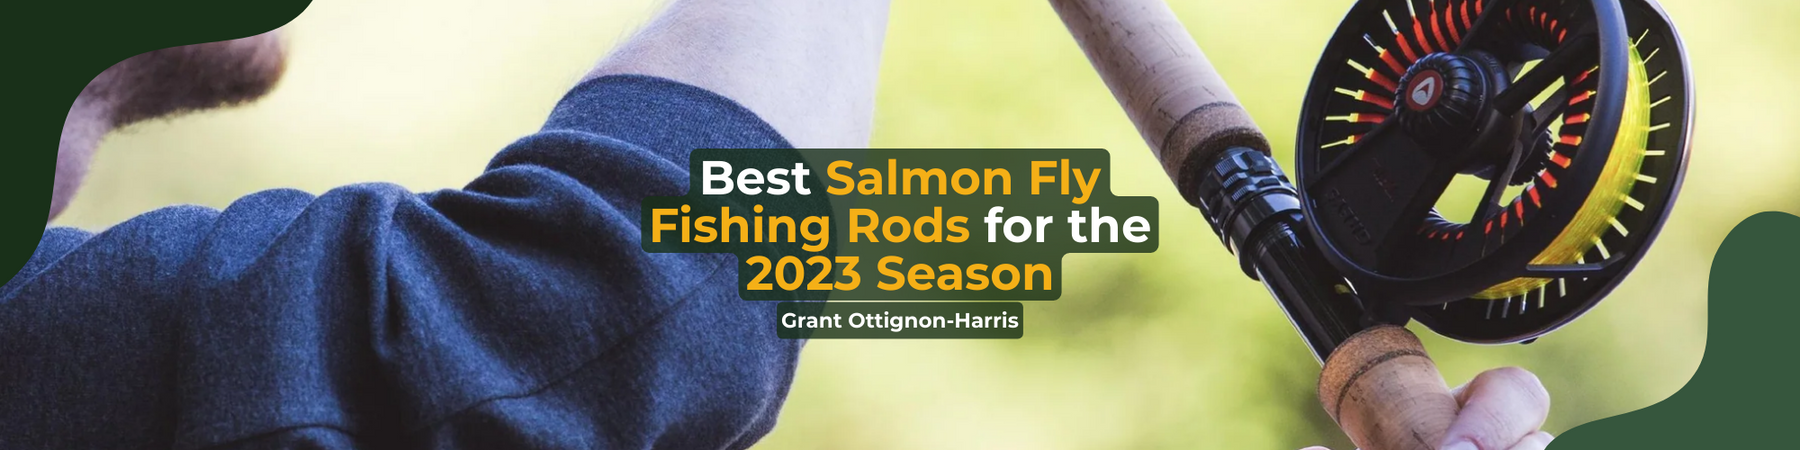 Best Salmon Fishing Rods for the 2023 Season